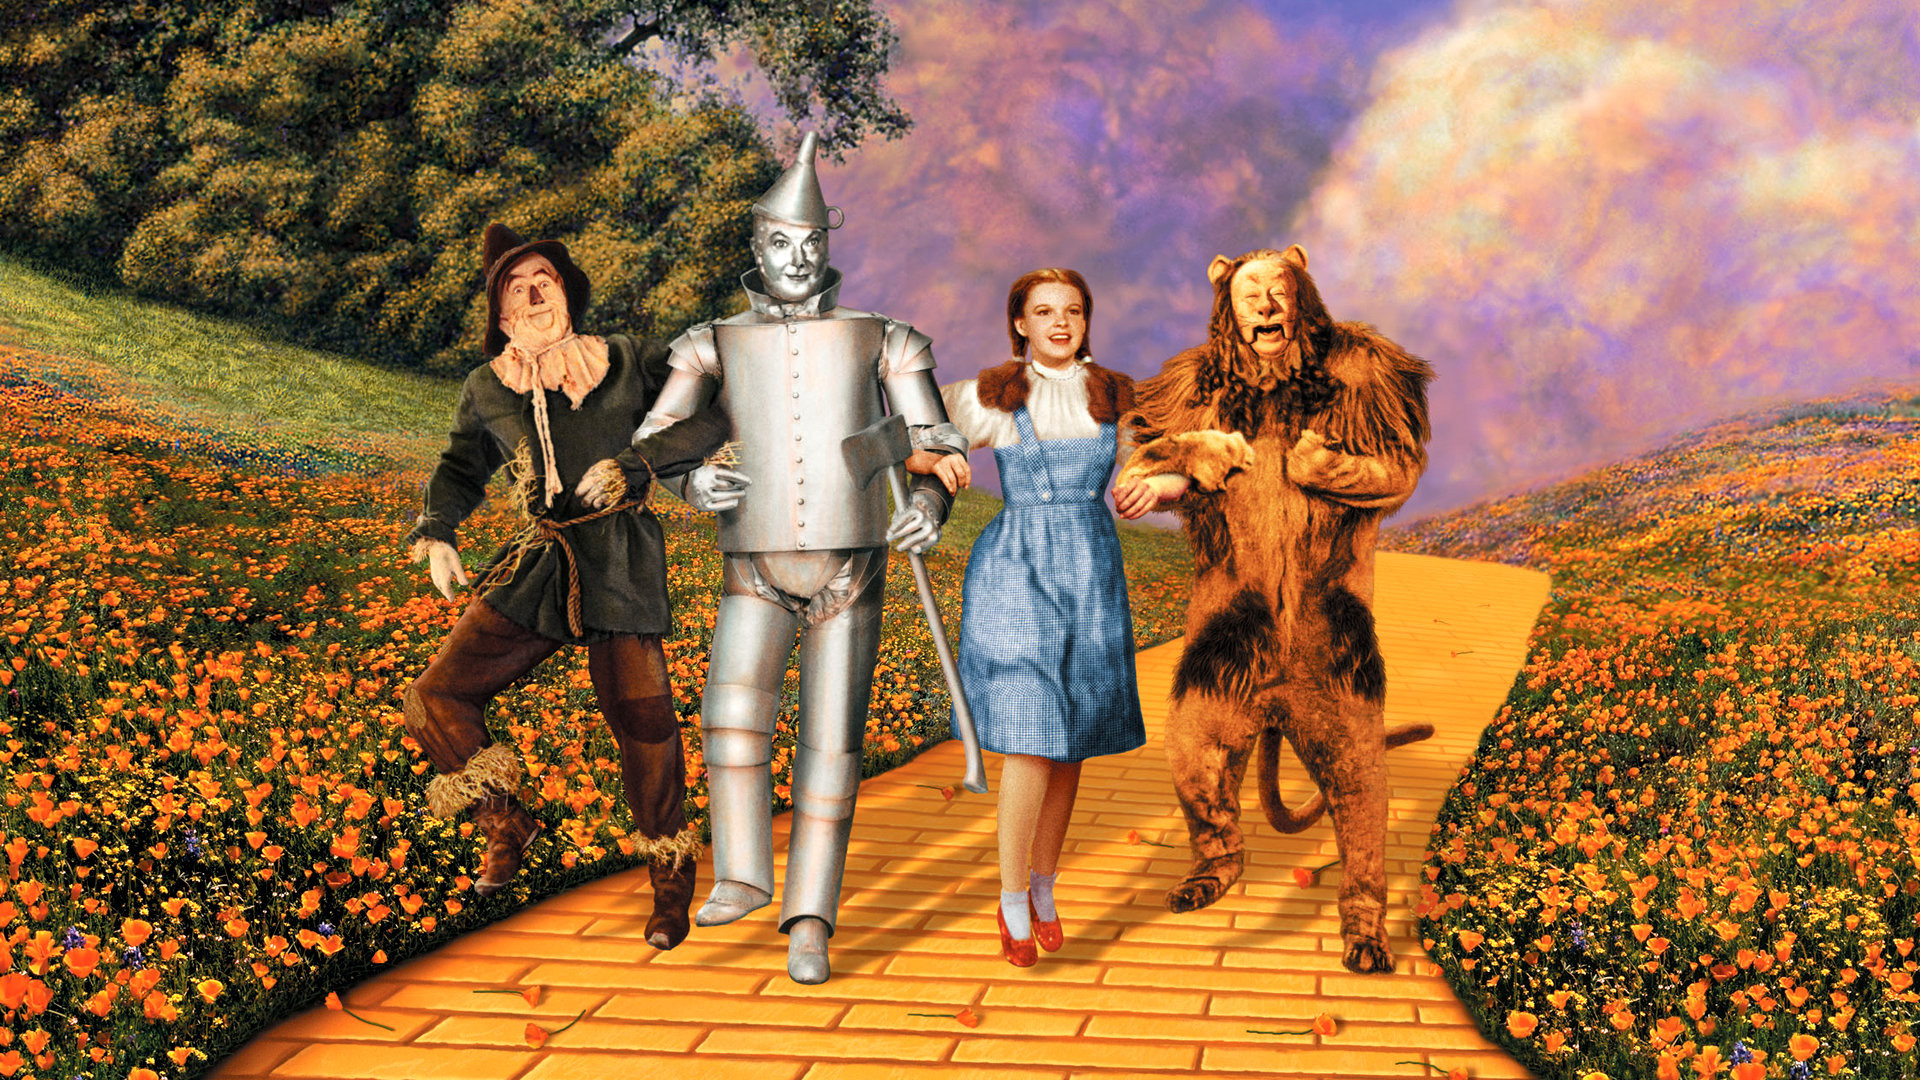 Who are YOU: Scarecrow, Tin Man, or Cowardly Lion?